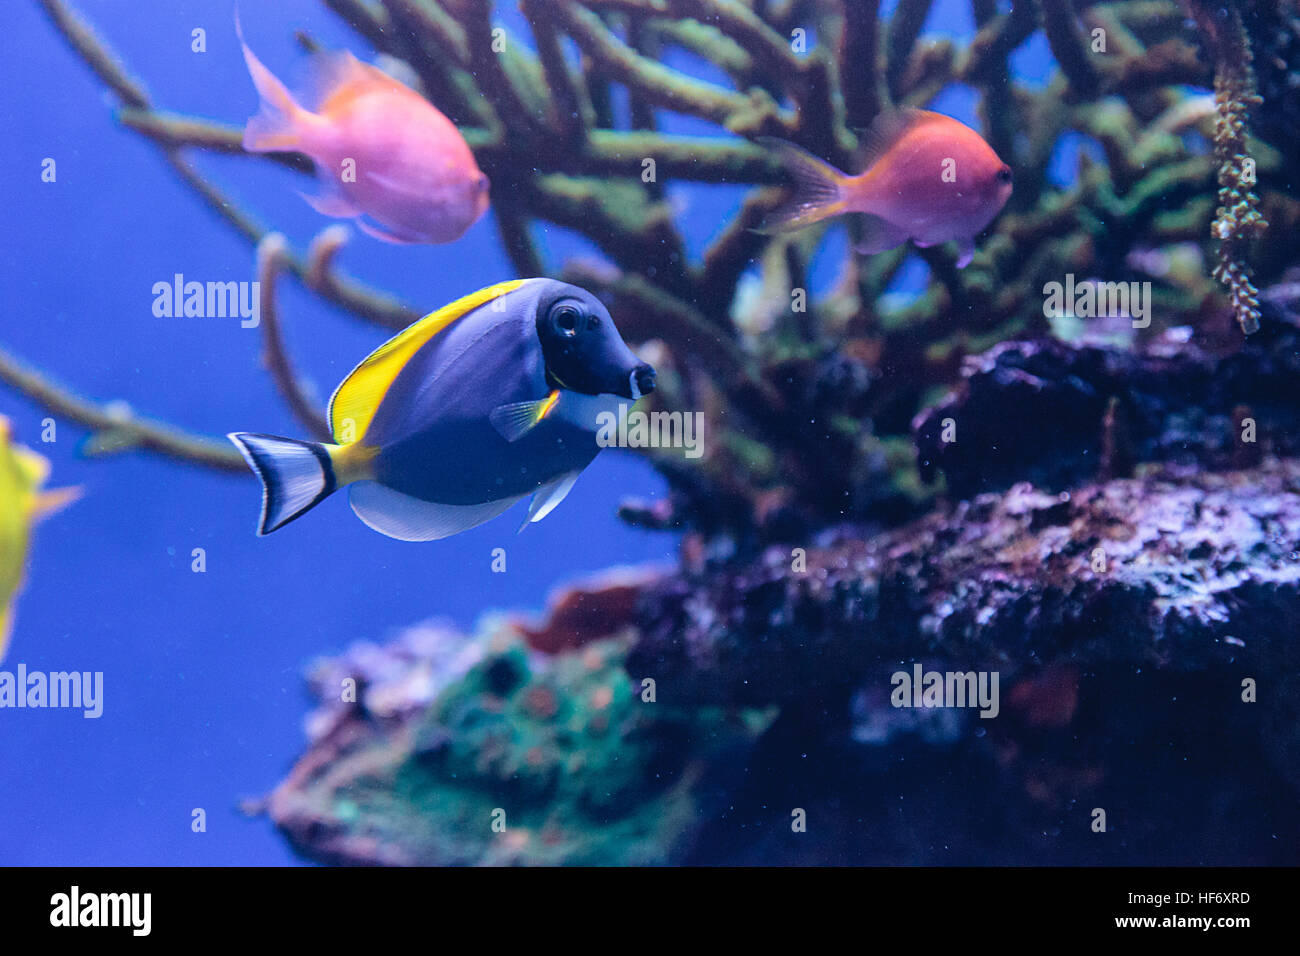 Powderblue tang fish Acanthurus leucosternon on a coral reef. Stock Photo